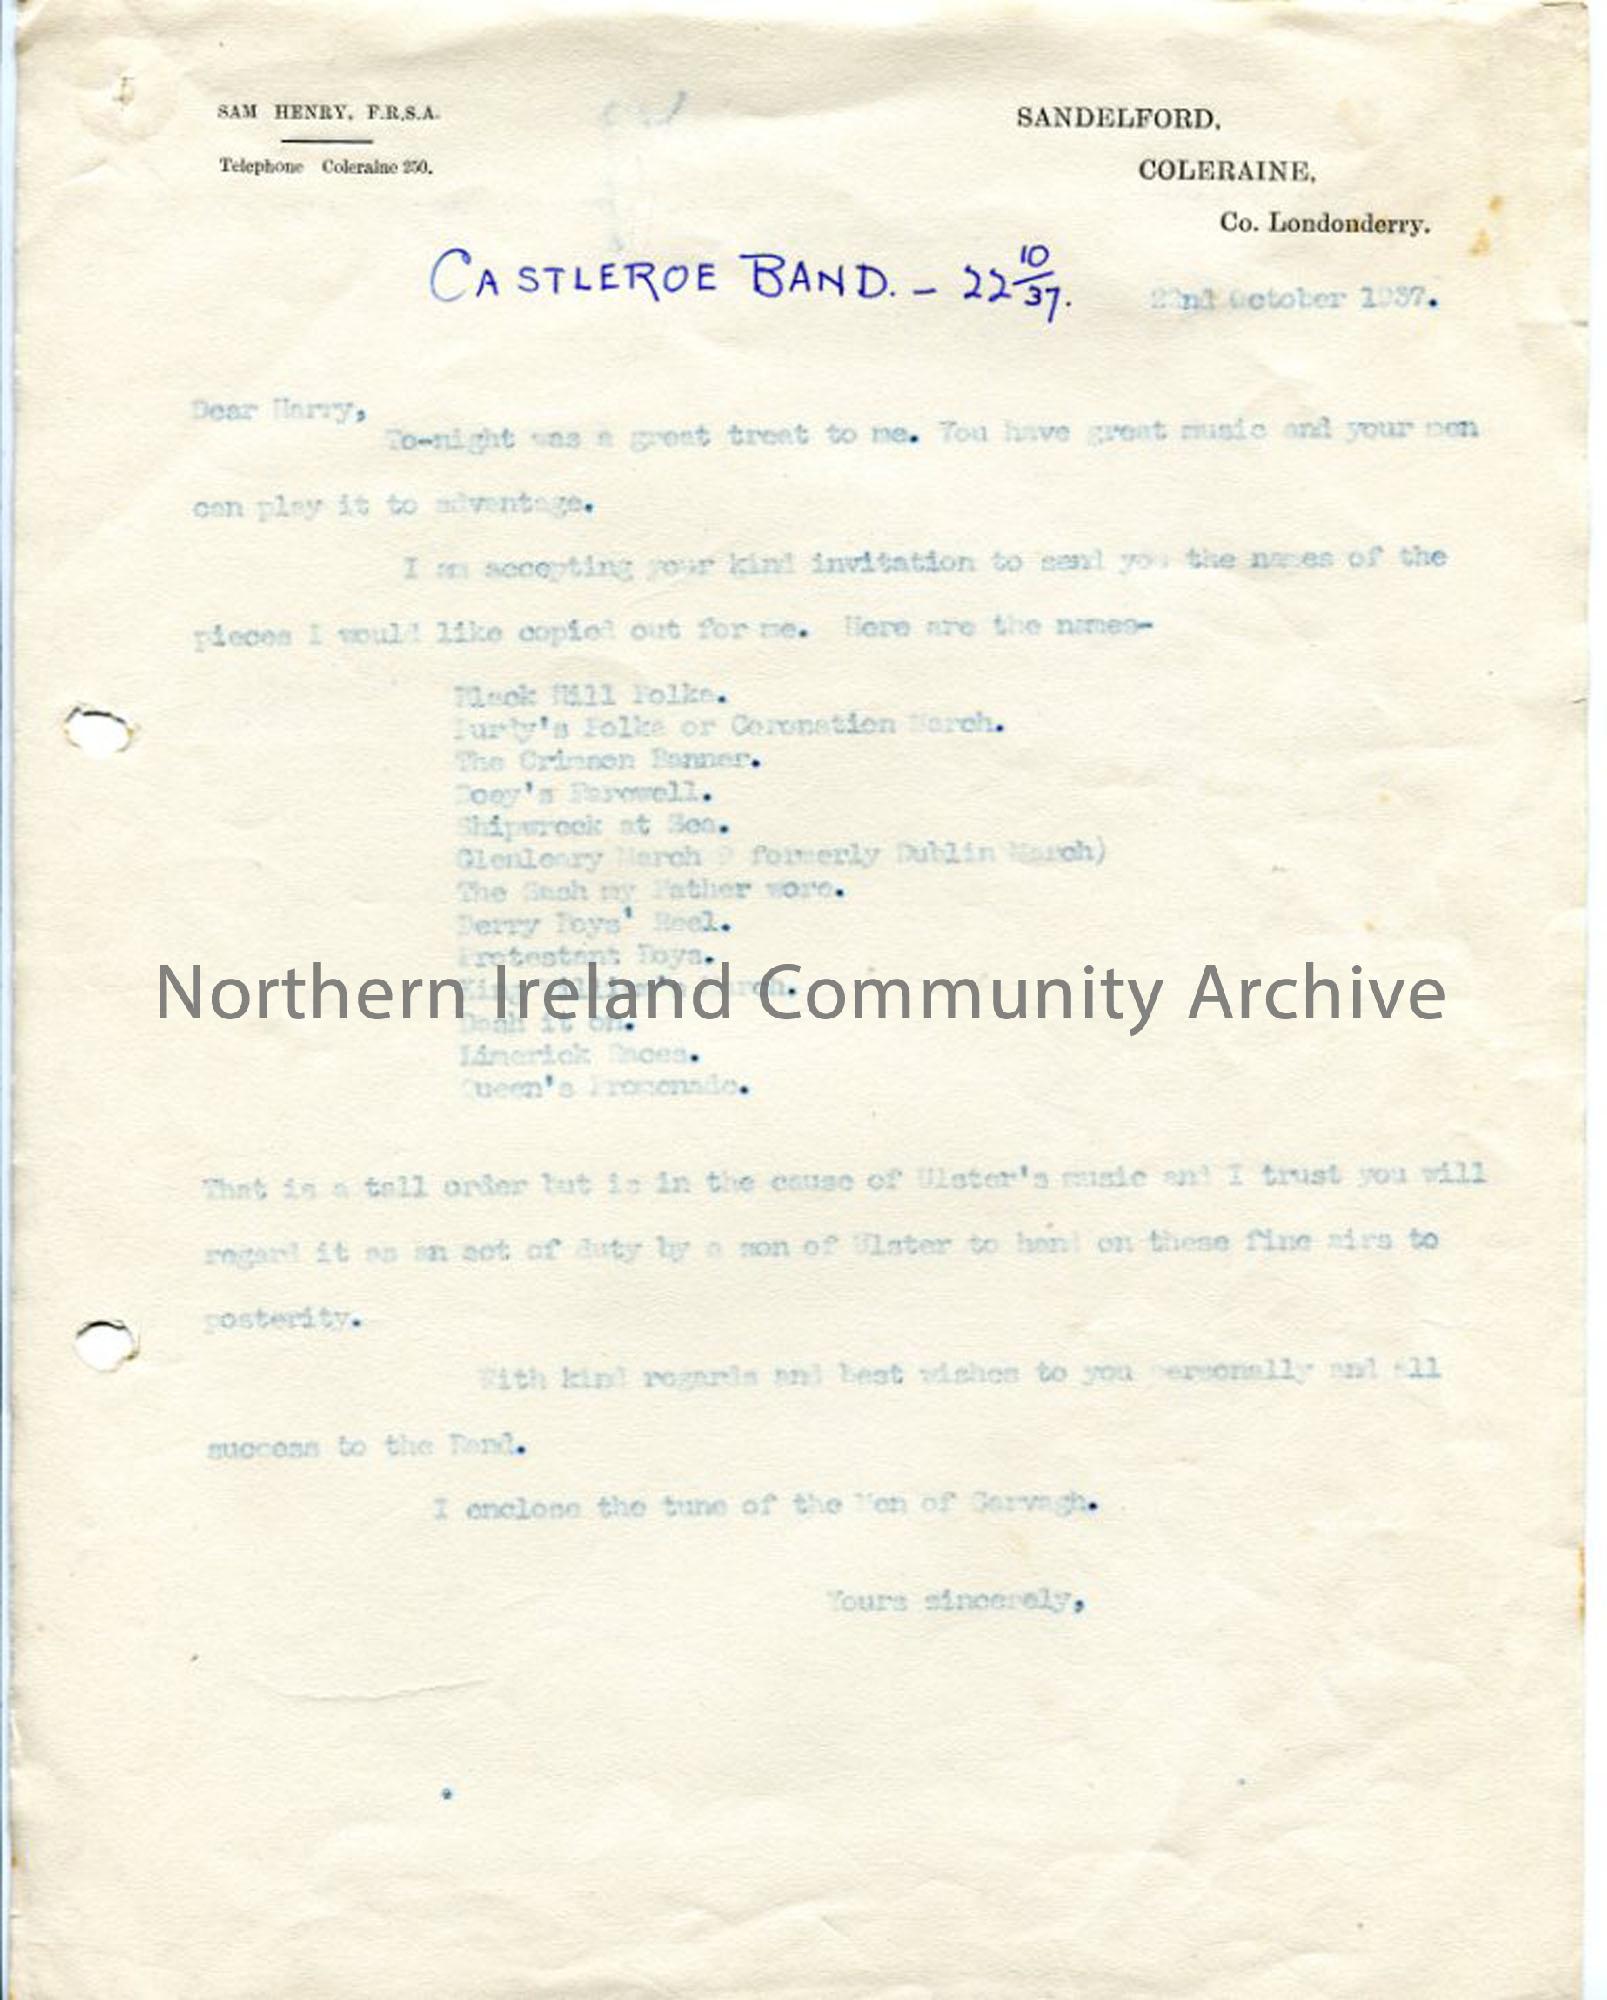 Copy of letter to Castleroe Protestant Flute Band, dated 22.10.1937